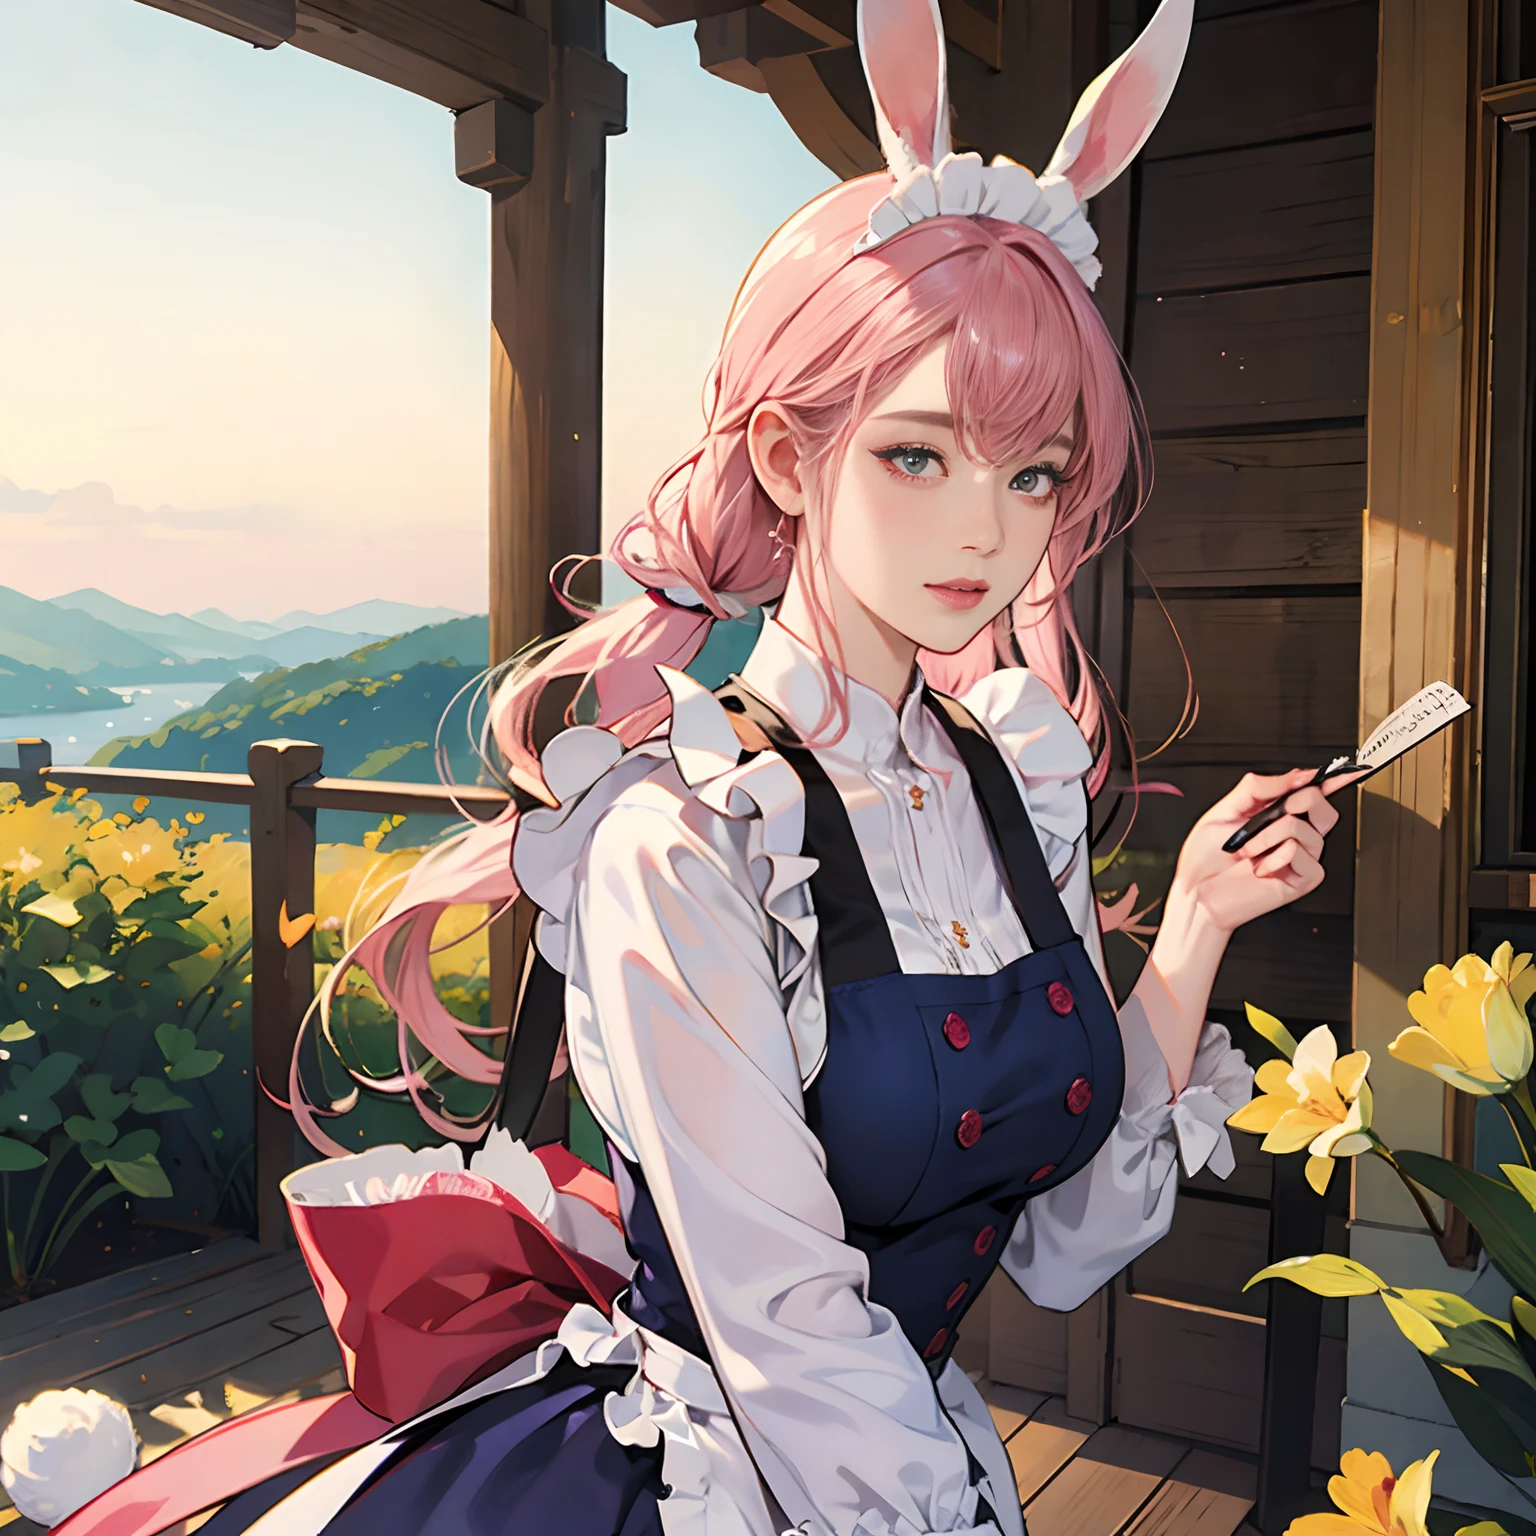 Women in Their 20s, Fantasia、offcial art, unity 8k wall paper, ultra-detailliert, beautifly、Aesthetic, ​masterpiece, top-quality, Photorealsitic、Rabbit eared clan、A pink-haired、Rabbit ears、Horan Drop、Lop Ear、Lop-eared rabbit:2.0、Flabby ears、Rimless glasses、Wrap your hair together、maid clothes、frilld、pinafore、depth of fields, Fantastic atmosphere, Calm palette, tranquil mood, Soft shading、Beautiful Landscapes、bbw、very large breast、plump figure、Carry meals、open terrace